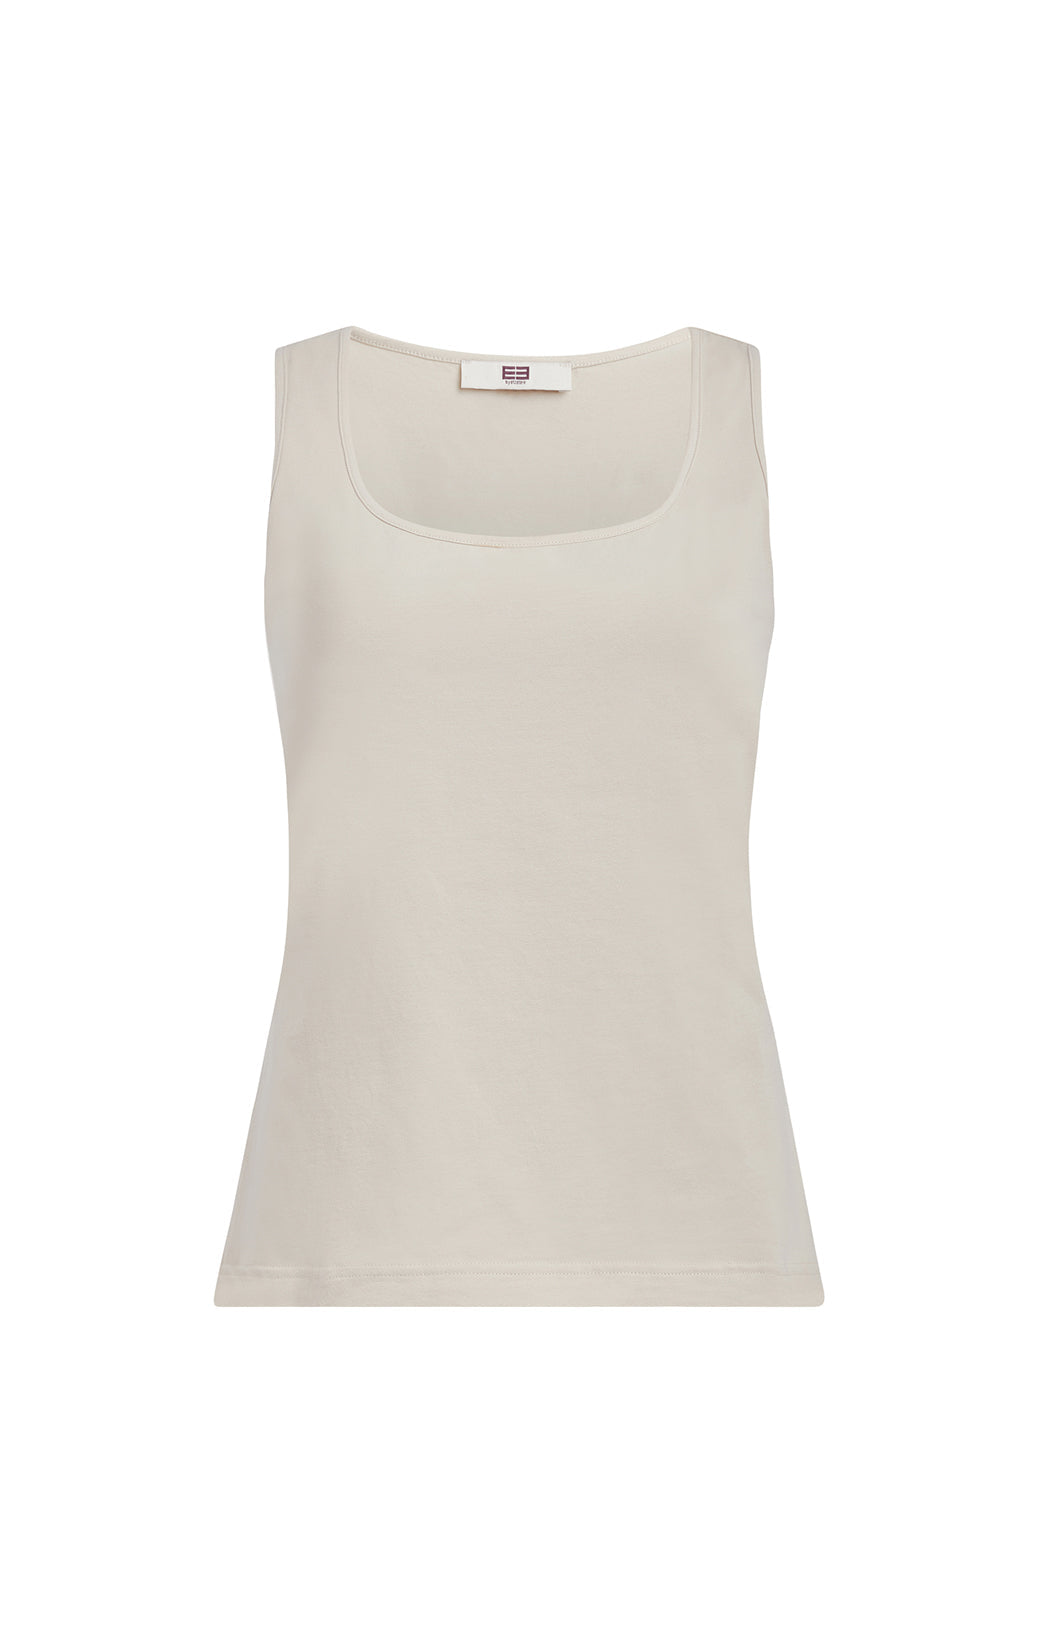 Laguna-Orn - Stretch Jersey Tank Top With Portrait Neck - Product Image